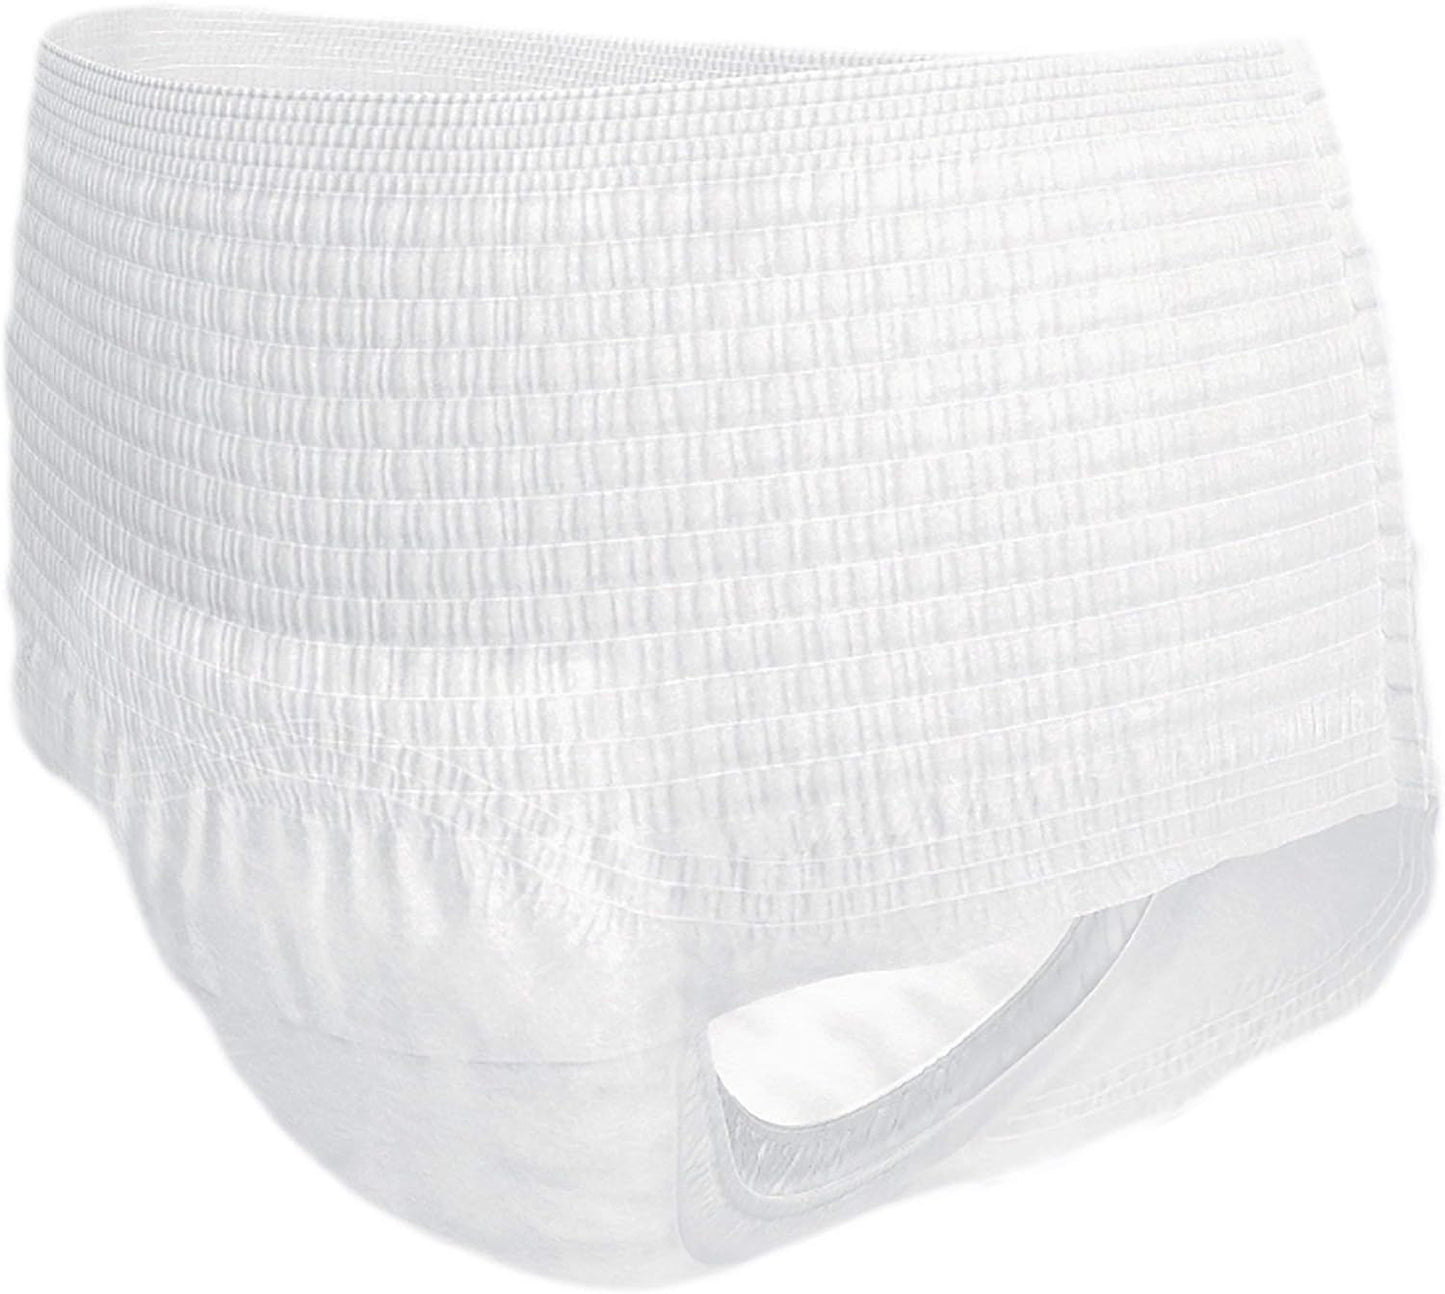 Tena Classic Protective Underwear, Large 48" to 59" Waist